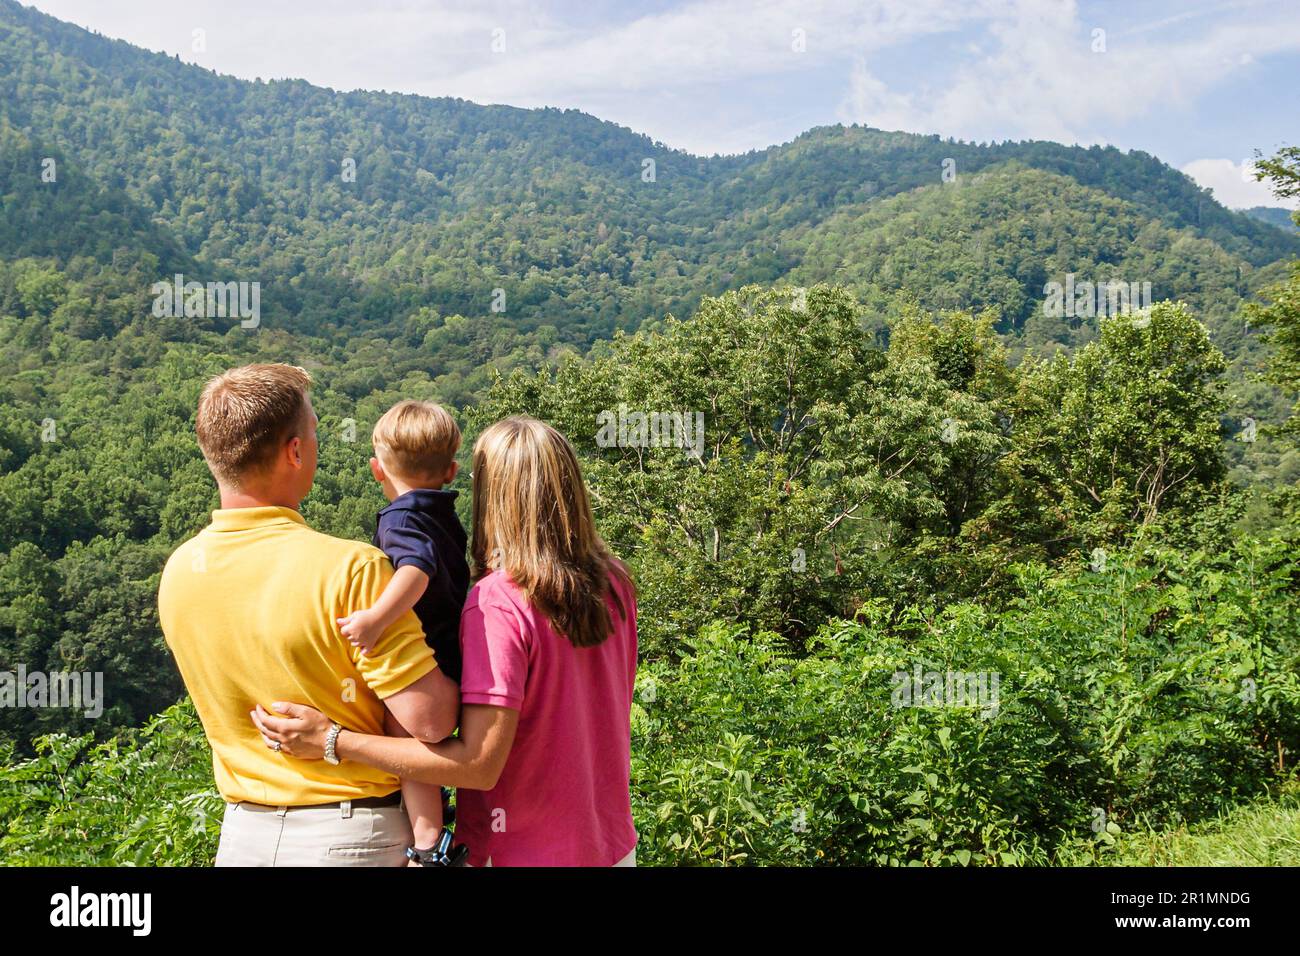 Tennessee Great Smoky Mountains National Park,Federal land,nature,natural,scenery,countryside,historic preservation,public,recreation,visitors travel Stock Photo